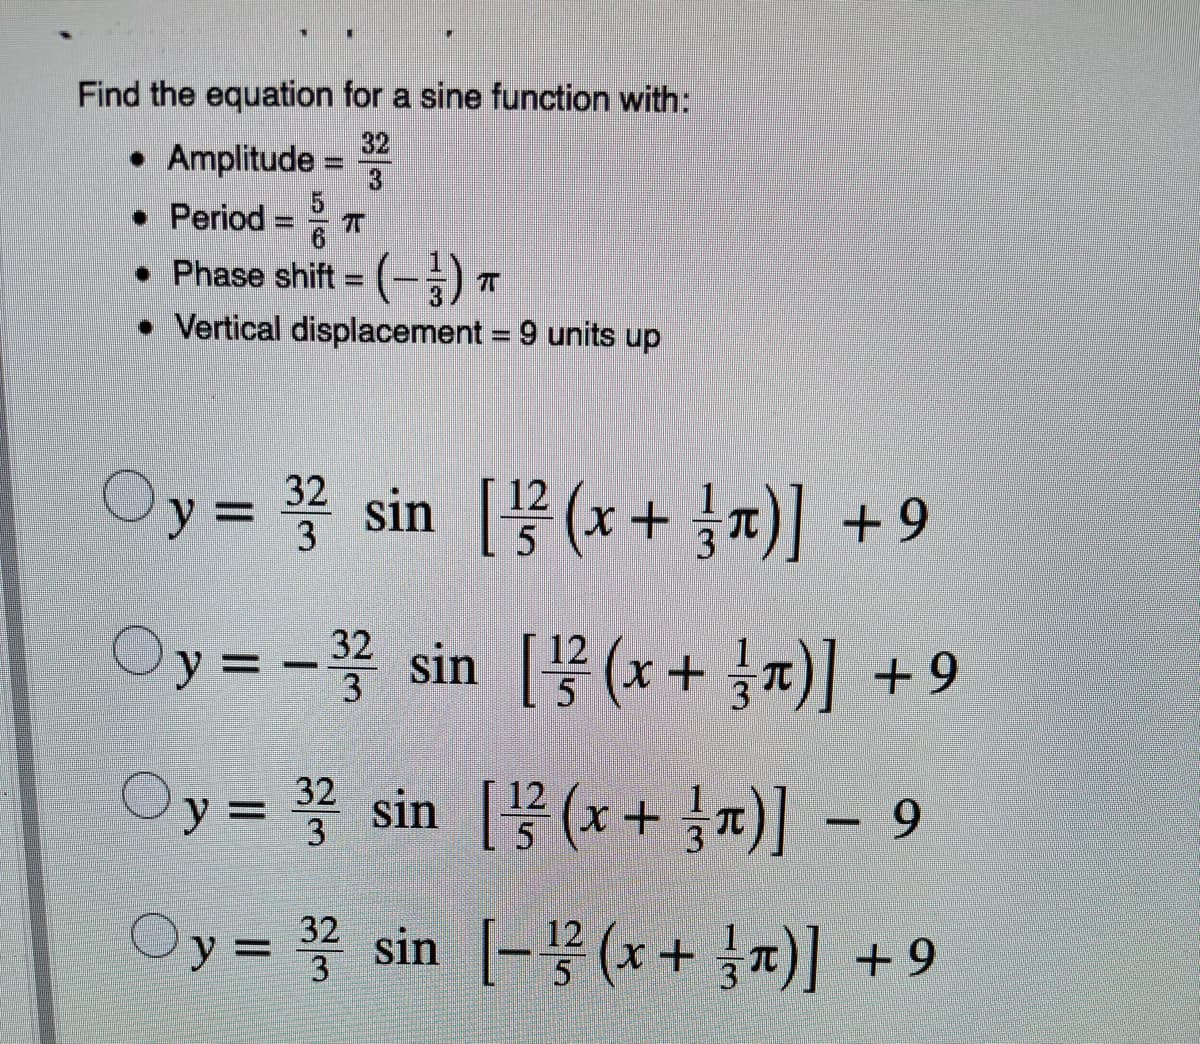 Find the equation for a sine function with:
32
• Amplitude
5
• Period
• Phase shift (-) T
• Vertical displacement = 9 units up
Oy =D sin [(x+ 찌)] +9
32
3
Oy3D-꽃 sin [무(x+ 1x)| +9
3
Oy=D 꽃 sin [(x + 1x)]-9
32
3
5
Oy =D sin -꽃 (x+ 찌 +9
32
12
5
3
